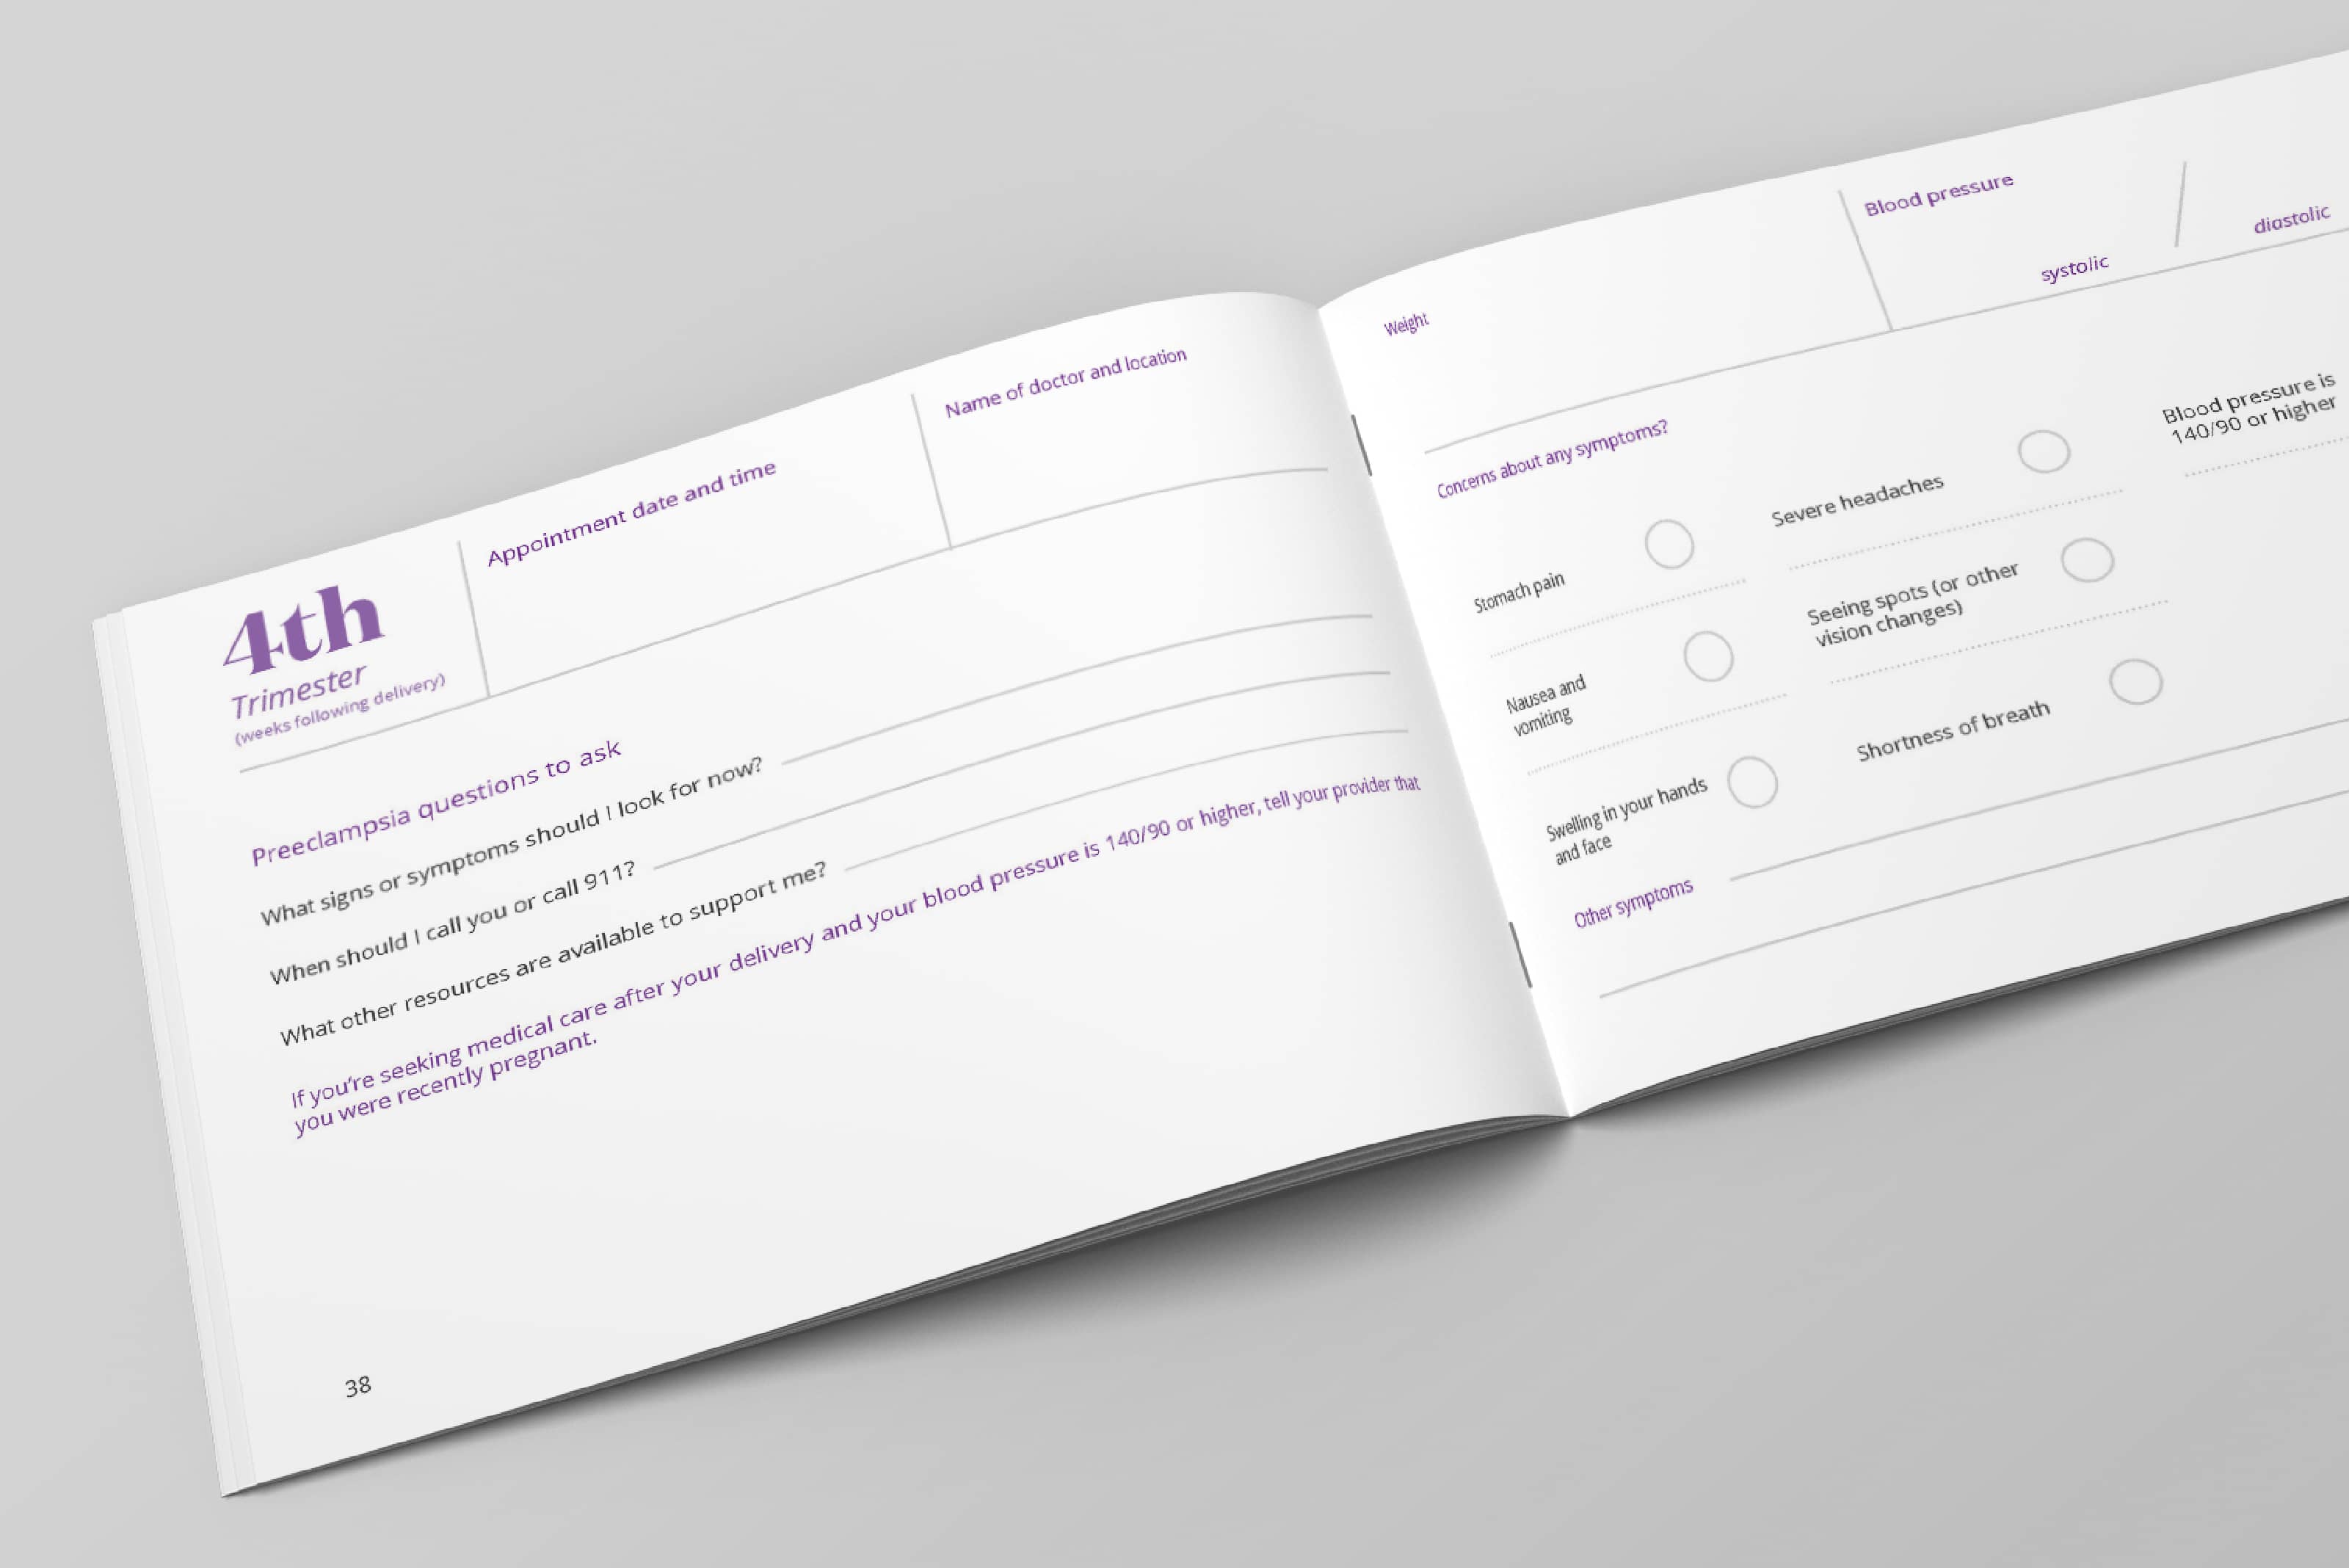 Inside pages from Aetna’s prenatal preeclampsia care kit booklet showing a worksheet